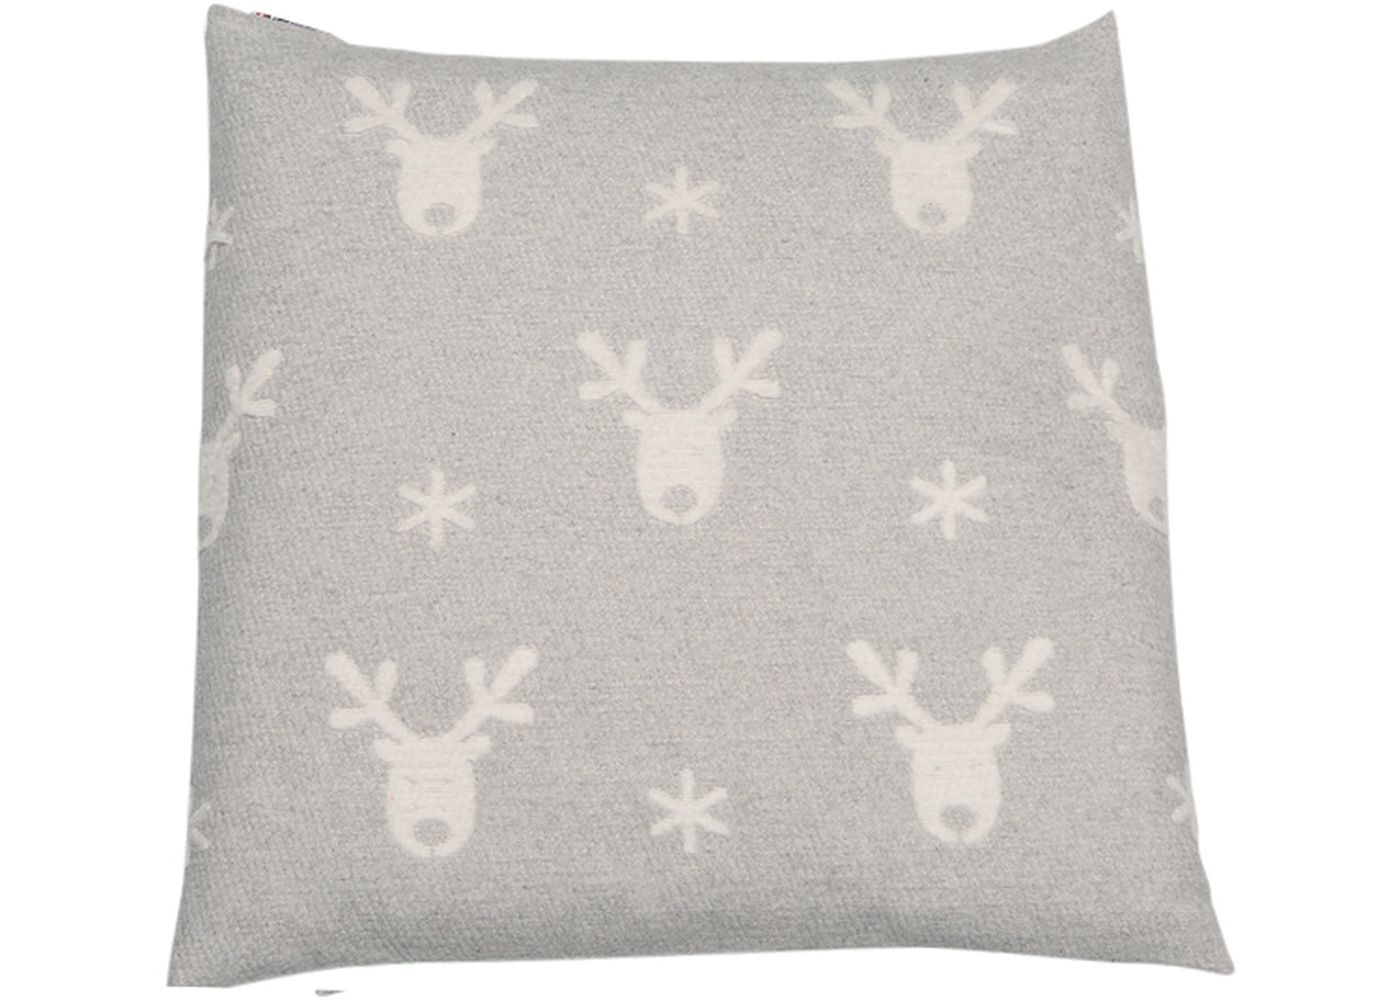 DECO cushion cover “reindeer allover”